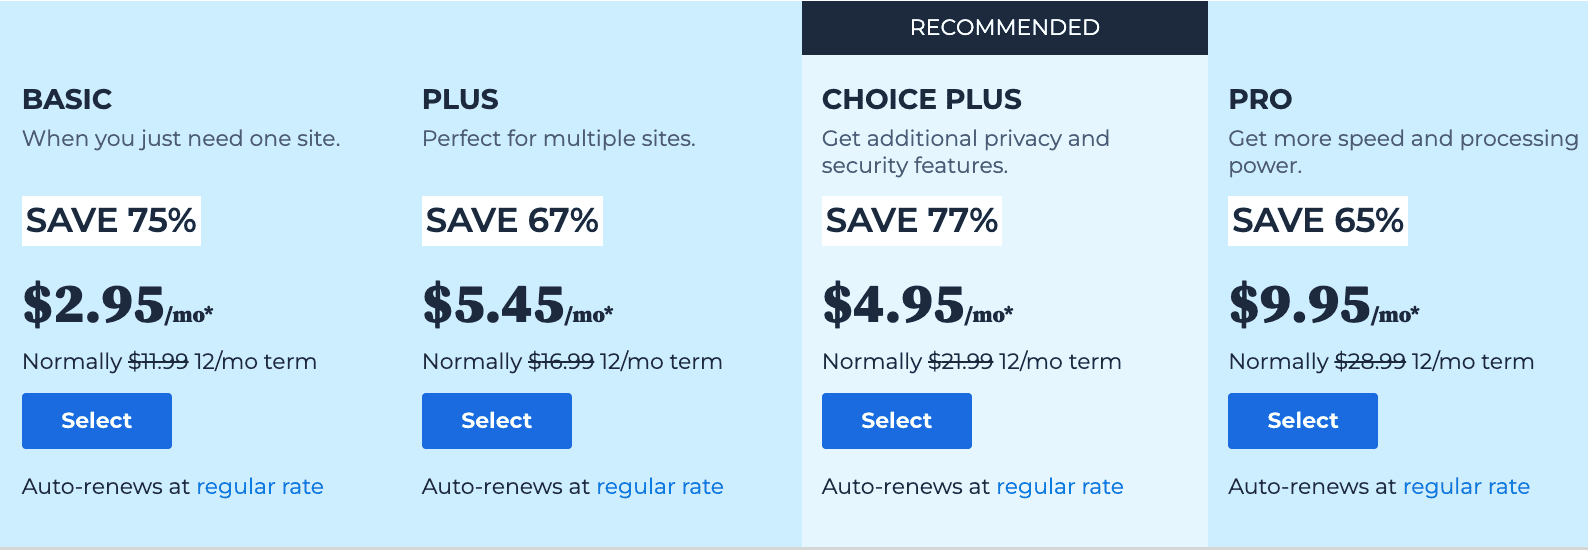 bluehost review pricing plans